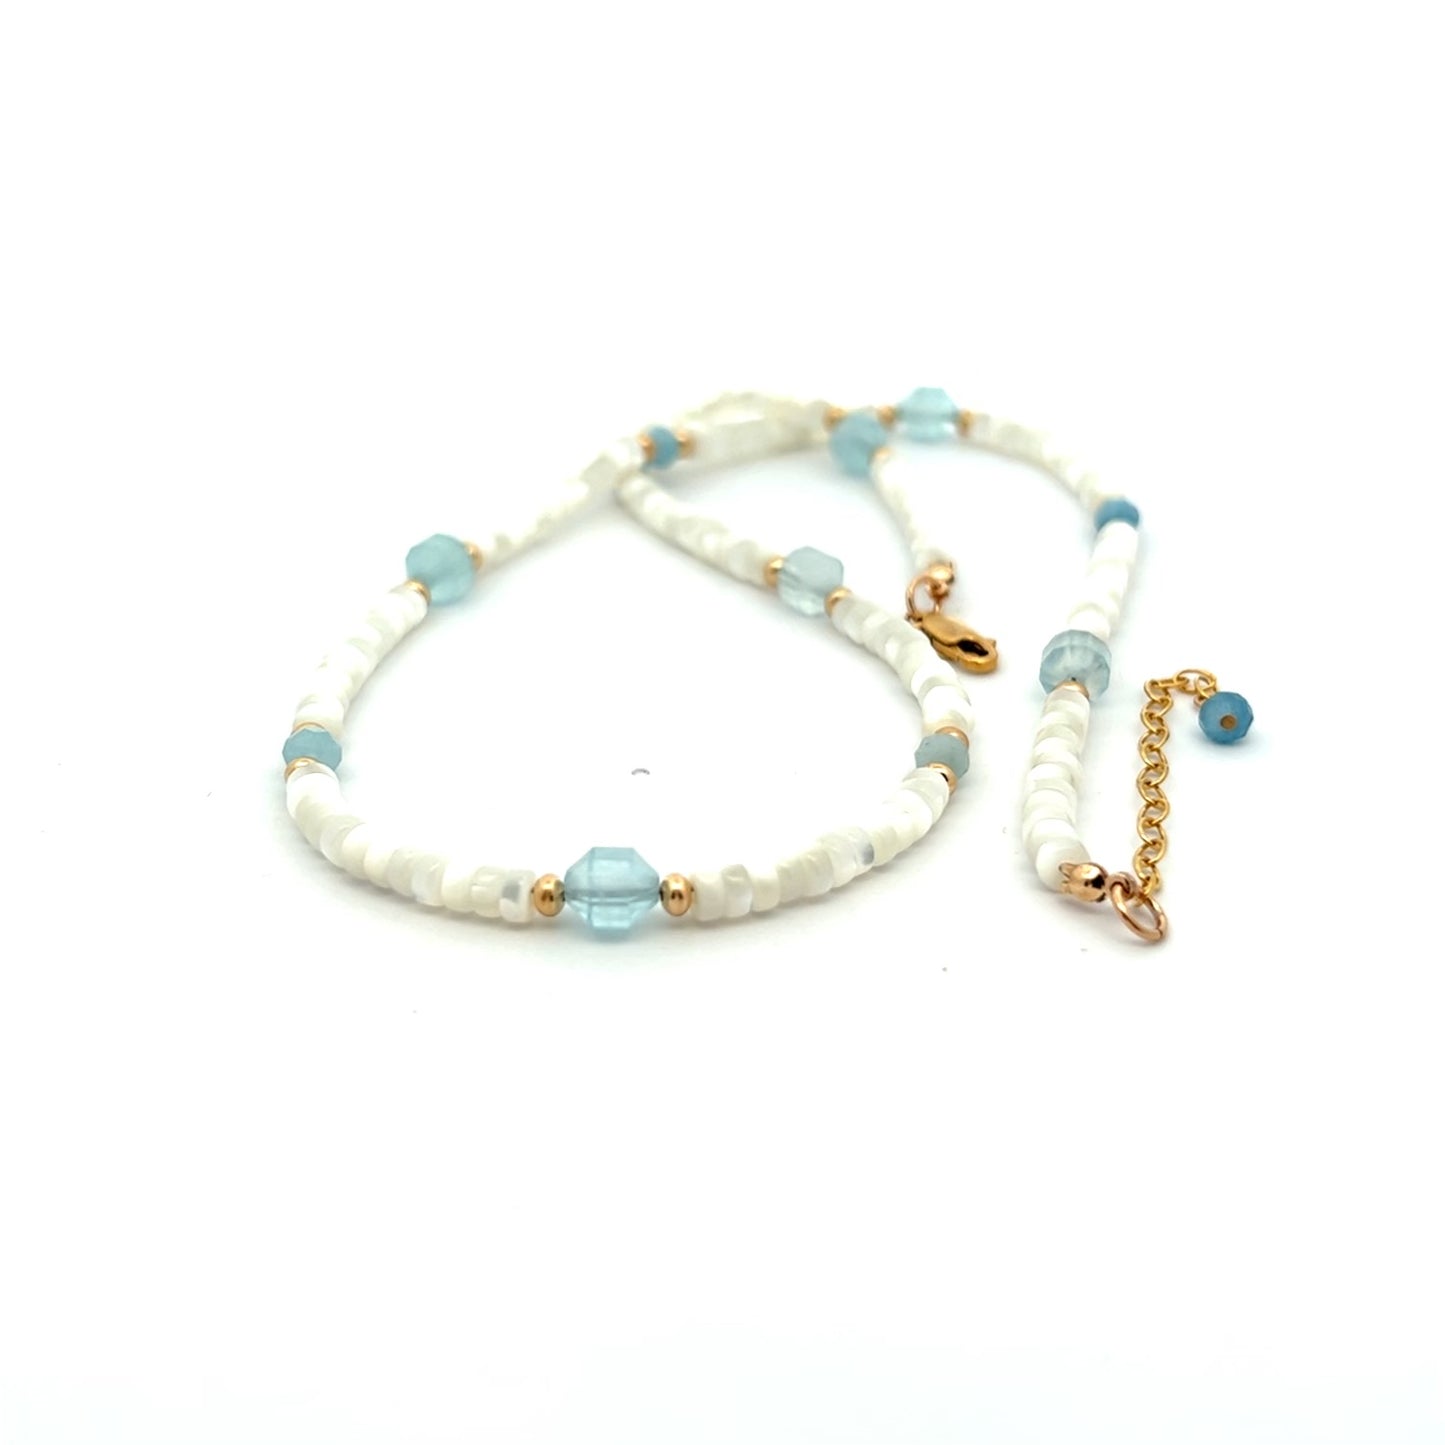 Aquamarine and Mother of Pearl Necklace 14k GF Gold